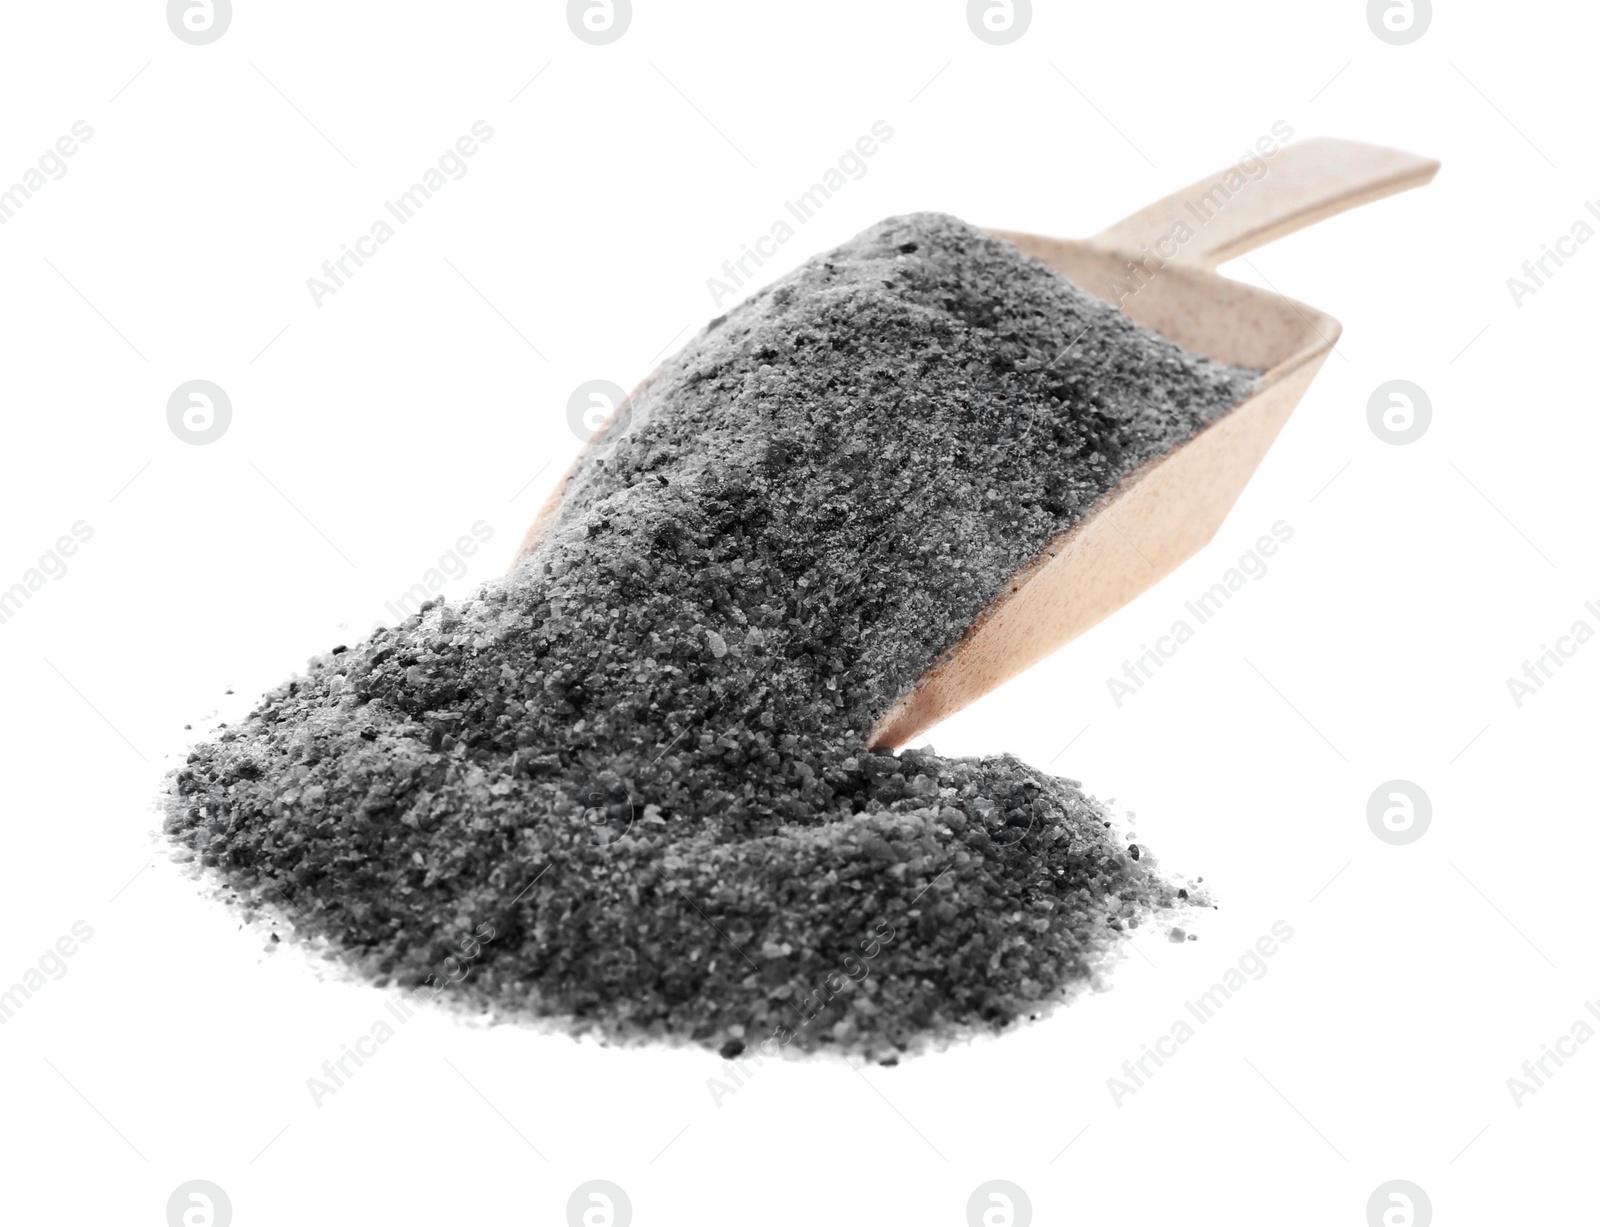 Photo of Pile of ground black salt and scoop on white background